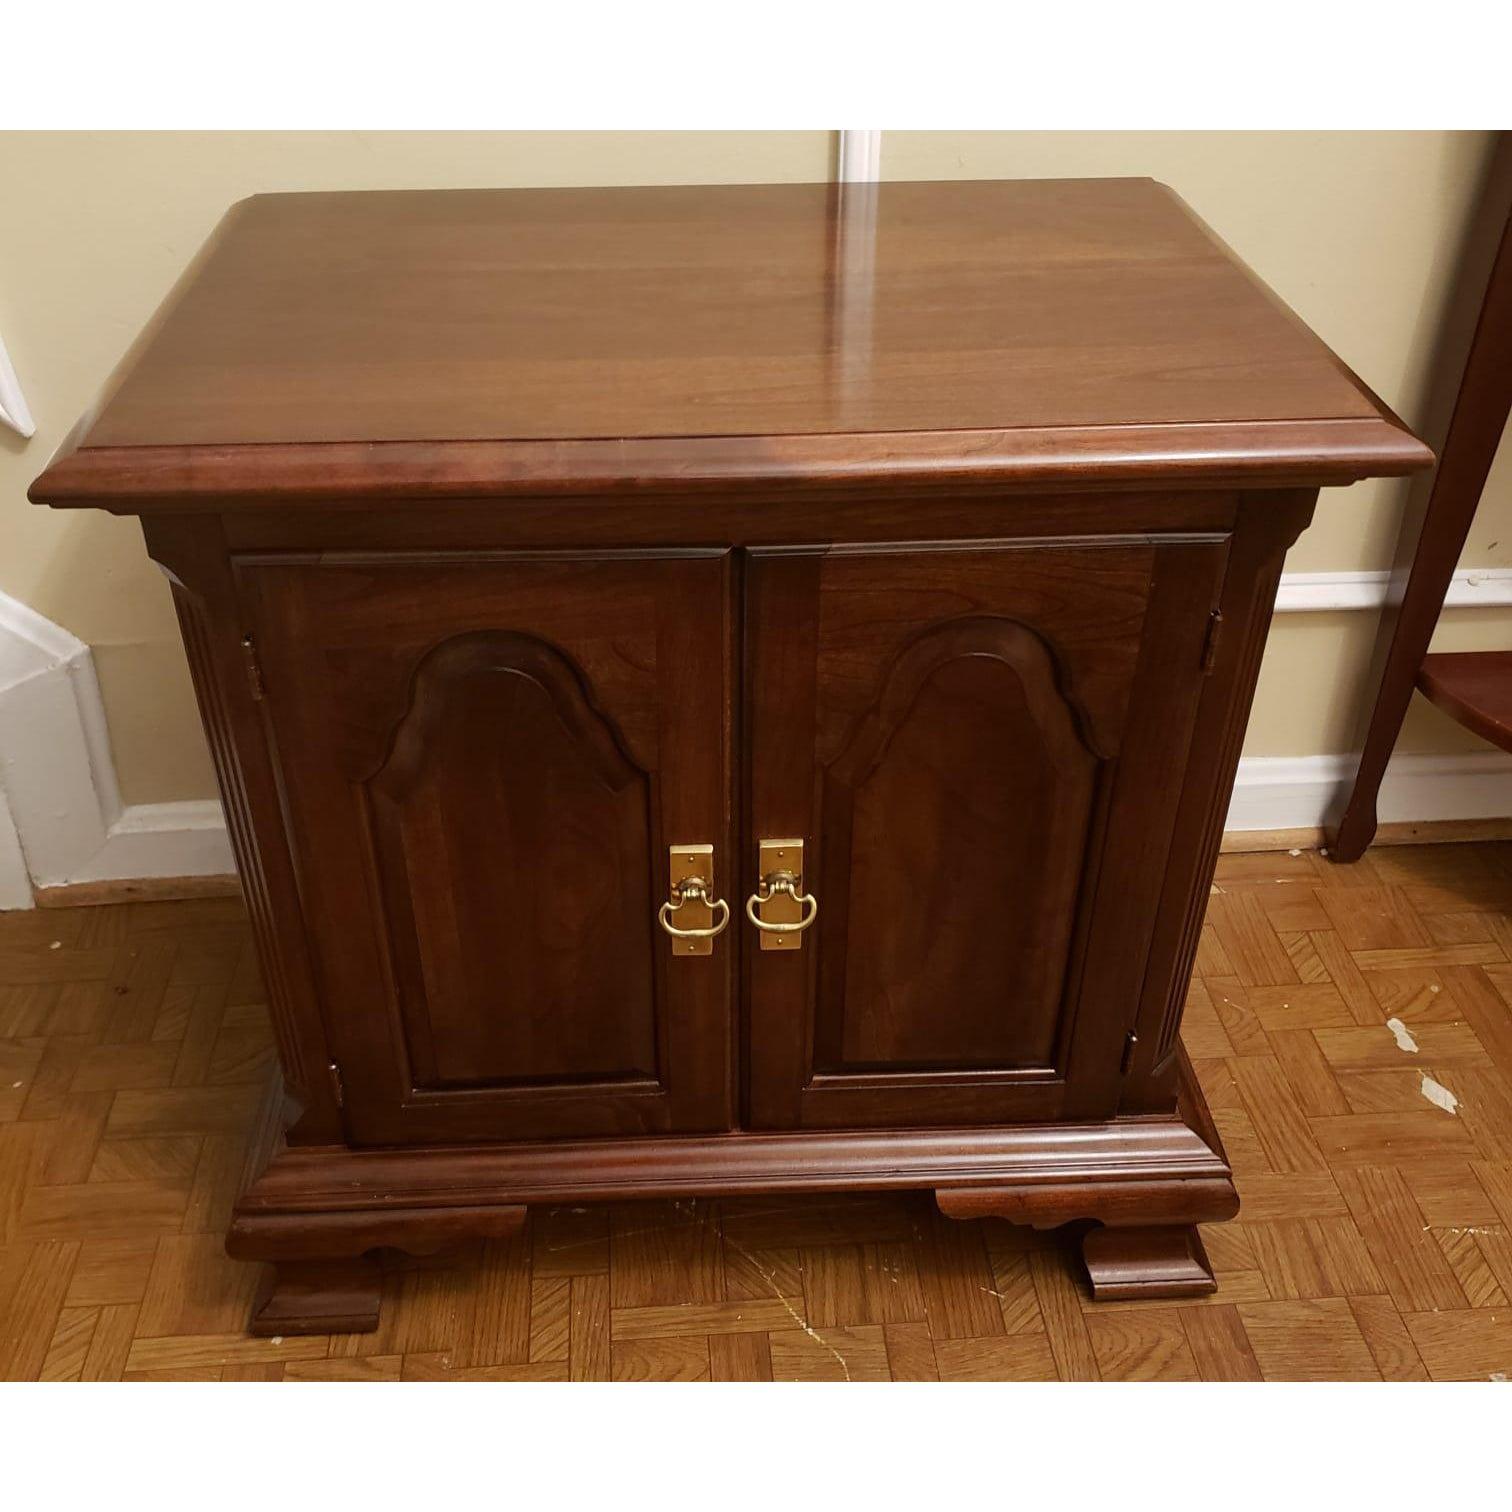 Pennsylvania House cherry nighstand dresser cabinet chest of drawers. Comes with protective glass top.
Measures: 24W x 16D x 24H.